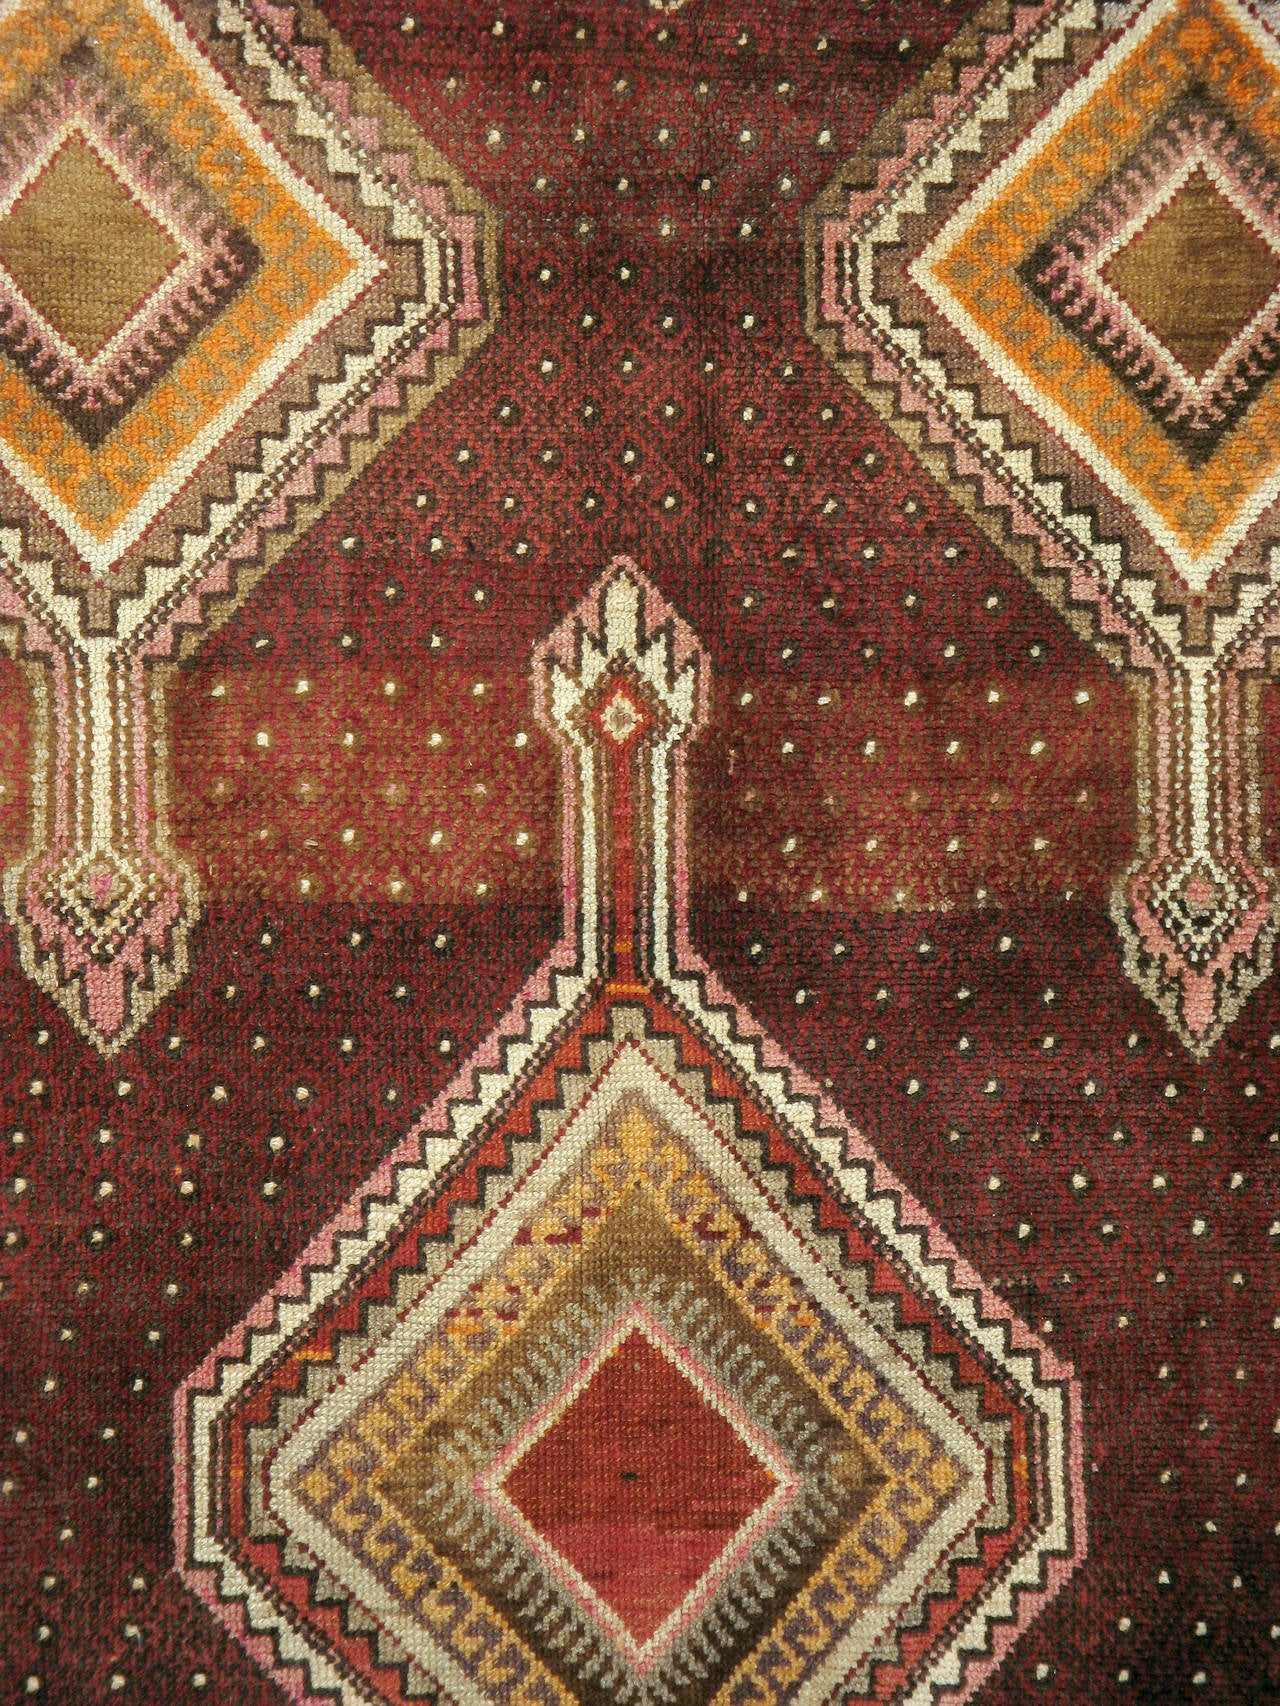 Vintage Turkish Anatolian rug a vintage Turkish Anatolian carpet from the second quarter of the 20th century with chic geometric motifs over a Marsala background.